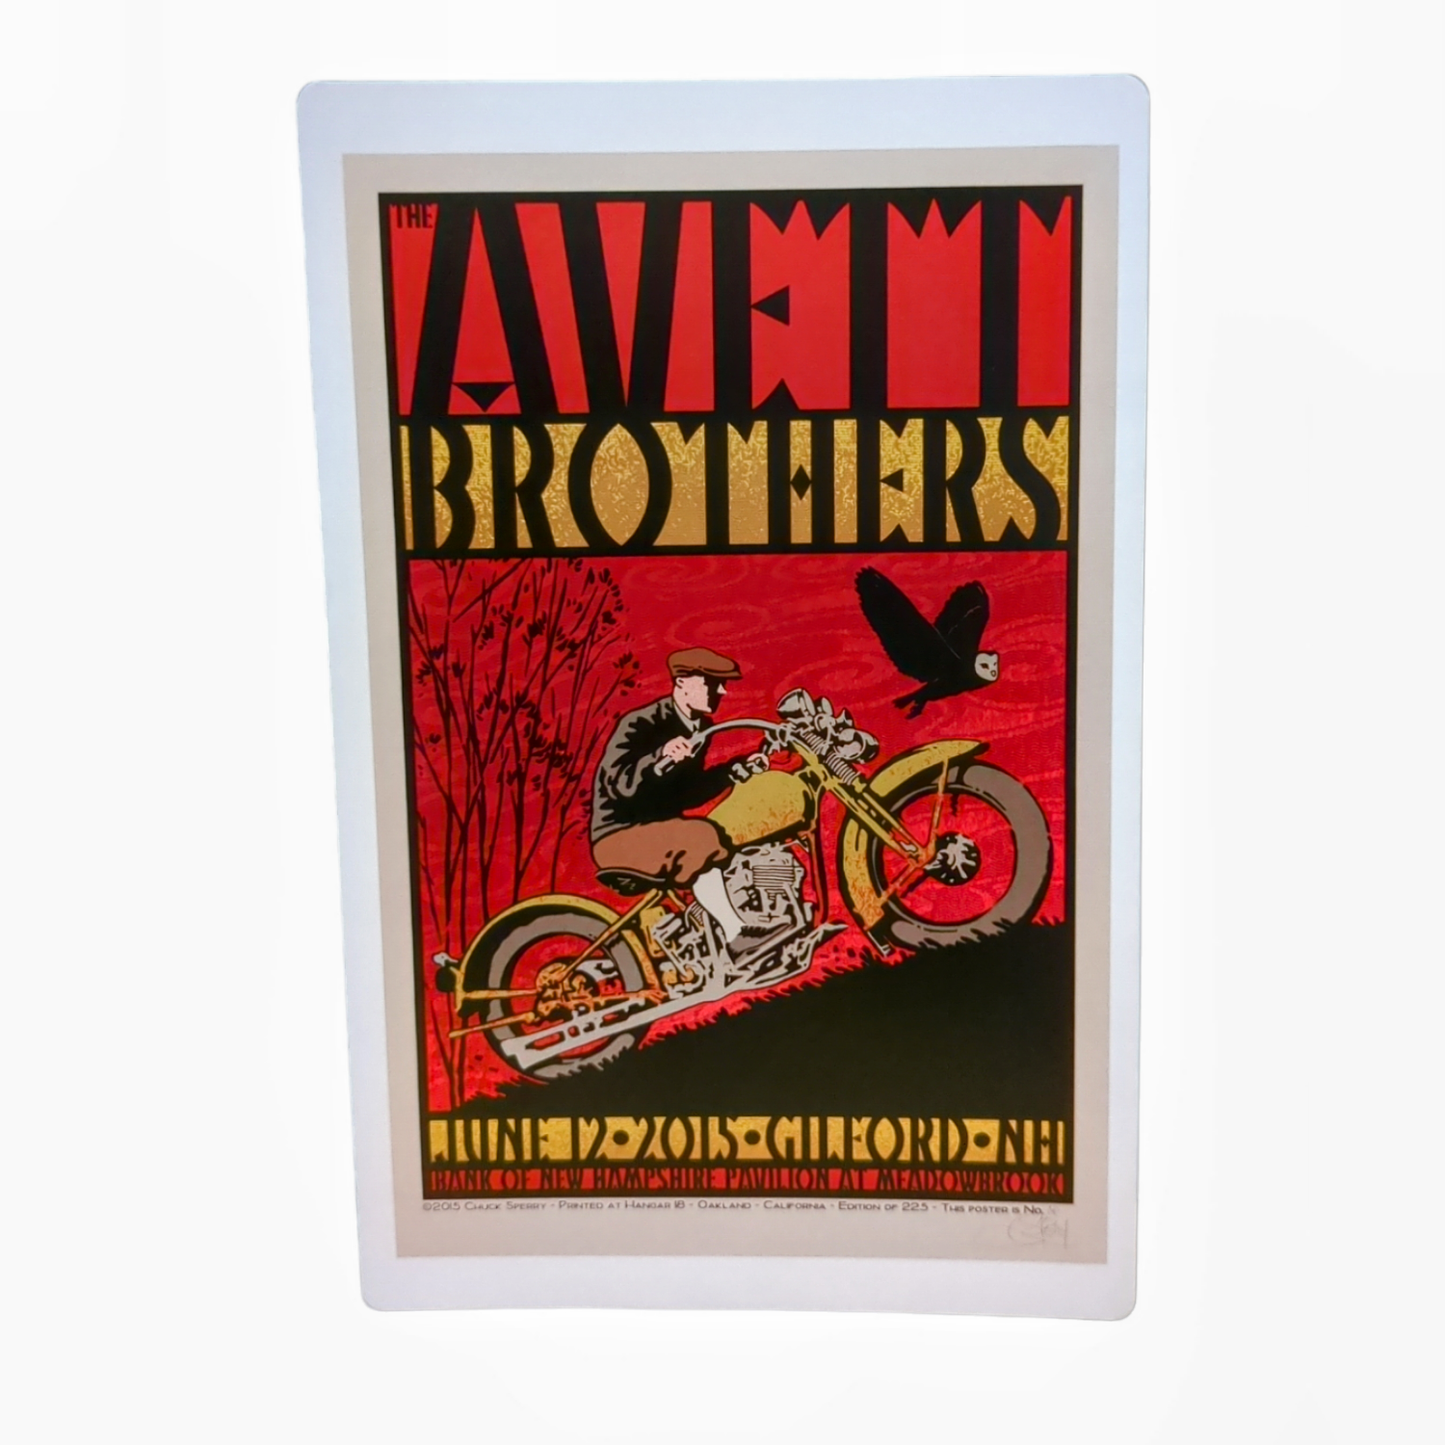 Chuck Sperry The Avett Brothers Gilford, New Hampshire 2015 Art Card Approx. 8.5 x 5.5 in